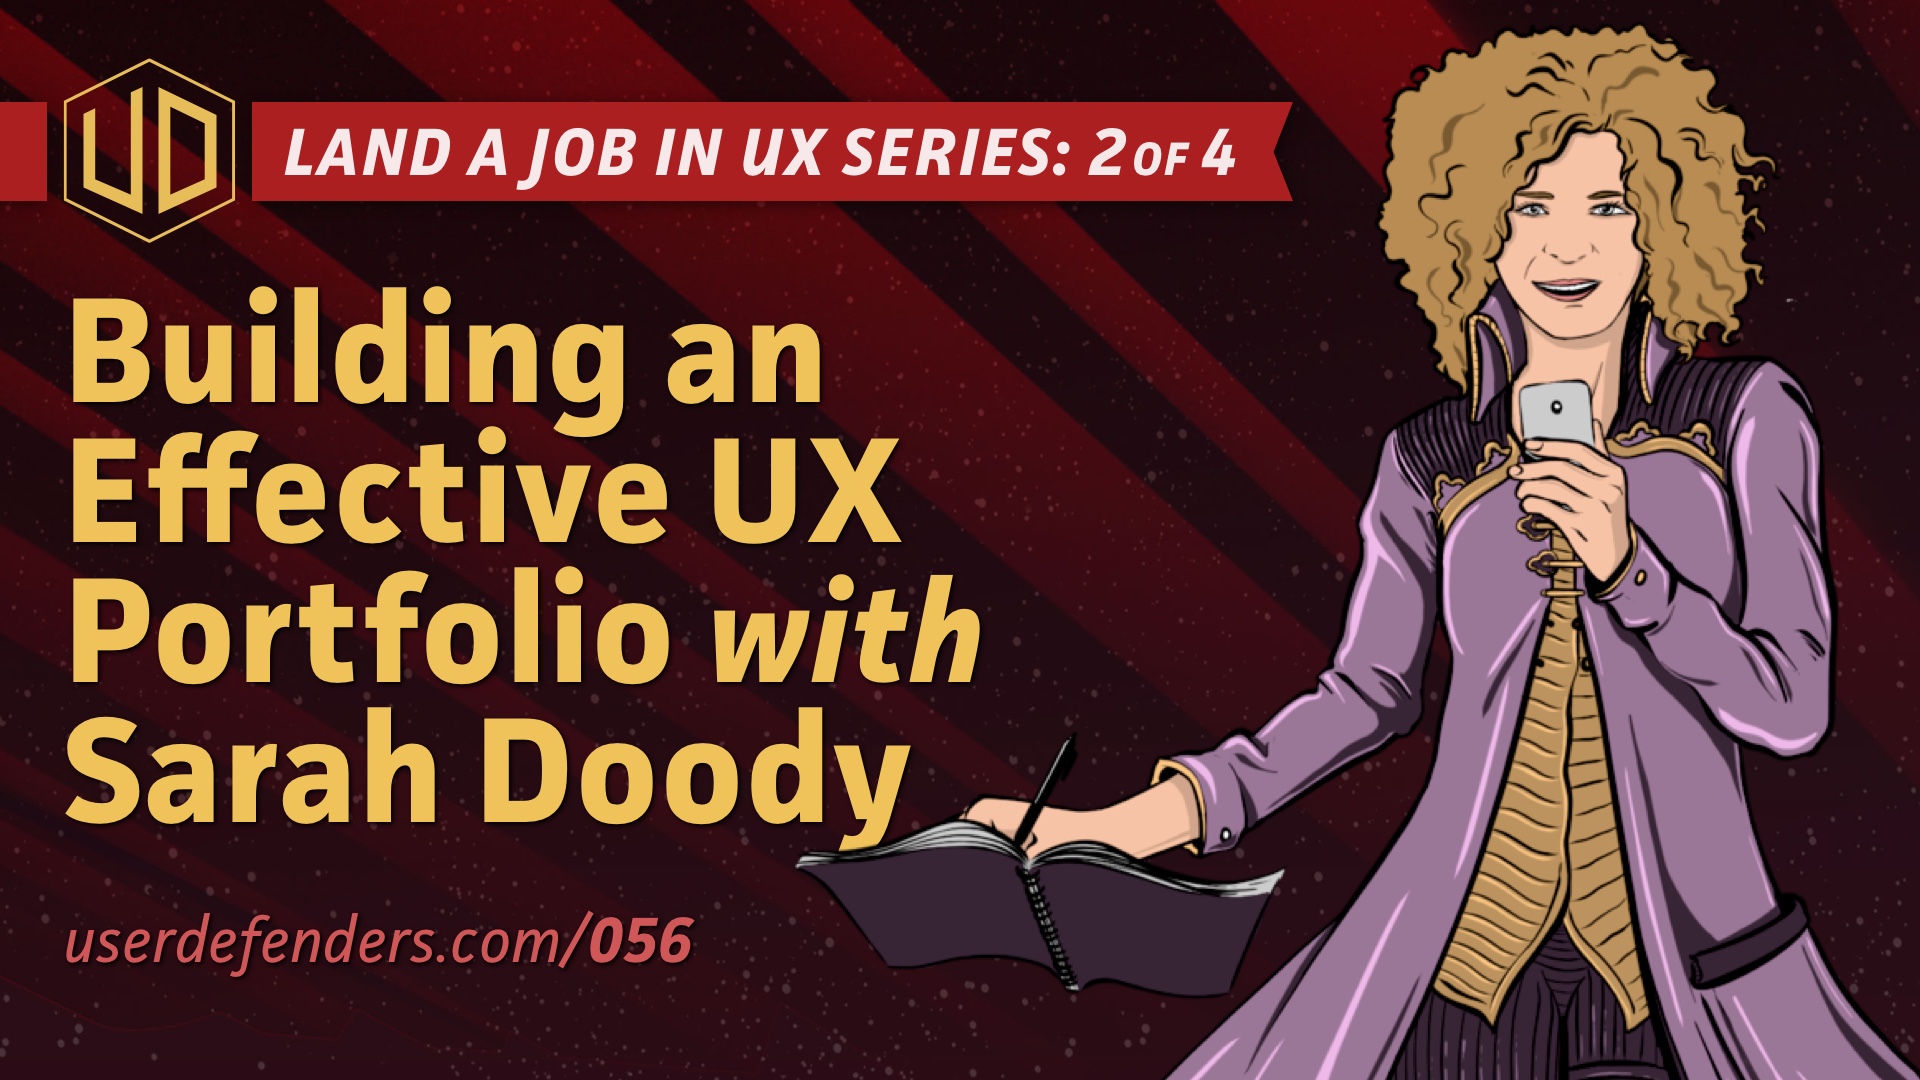 Land a Job in UX Series: User Defenders: Podcast with Sarah Doody on Building an Effective UX Portfolio